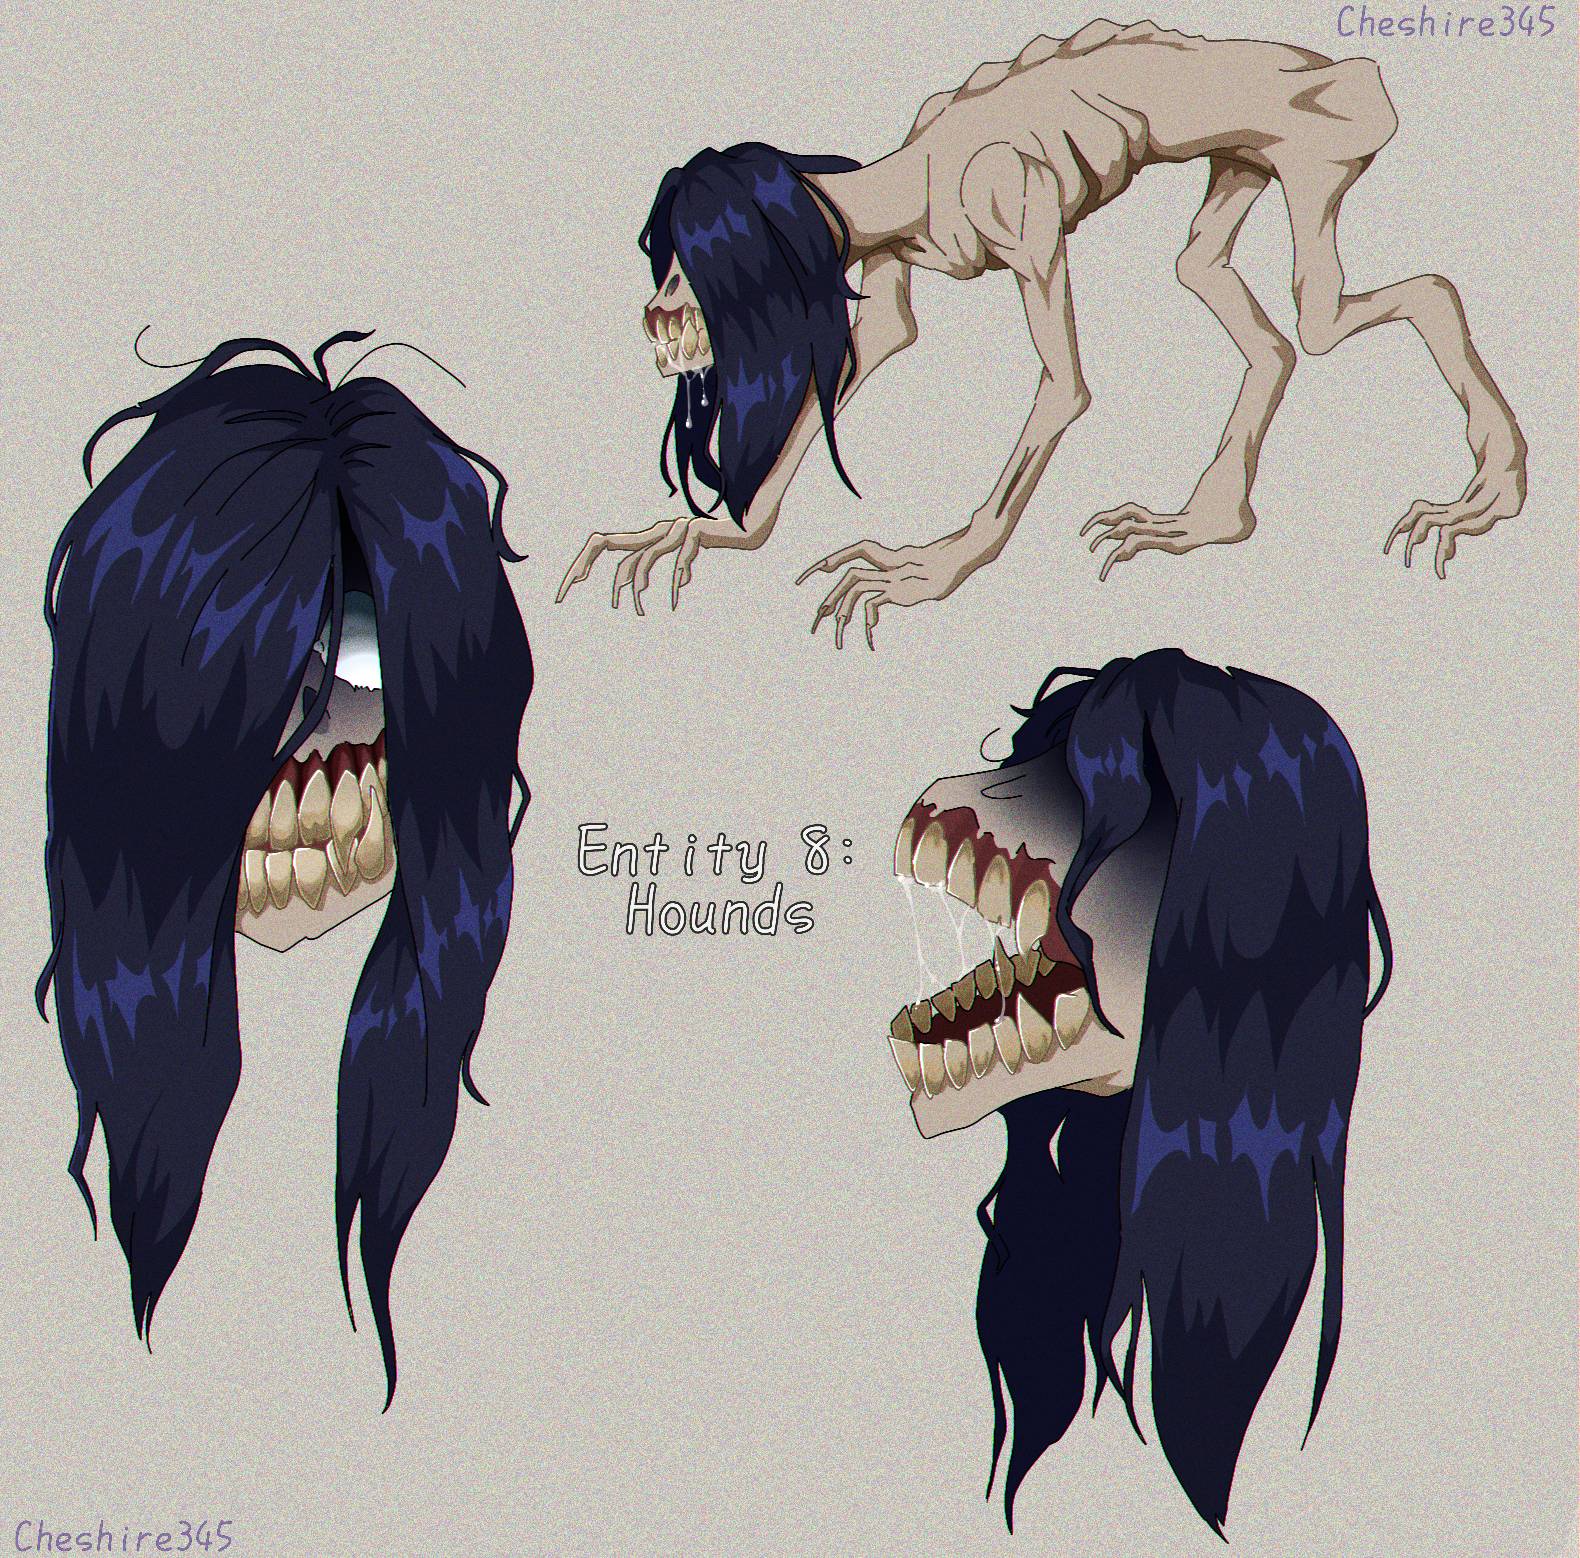 Backrooms Entity 18: The Beast of Level 5 by Cheshire345 on DeviantArt